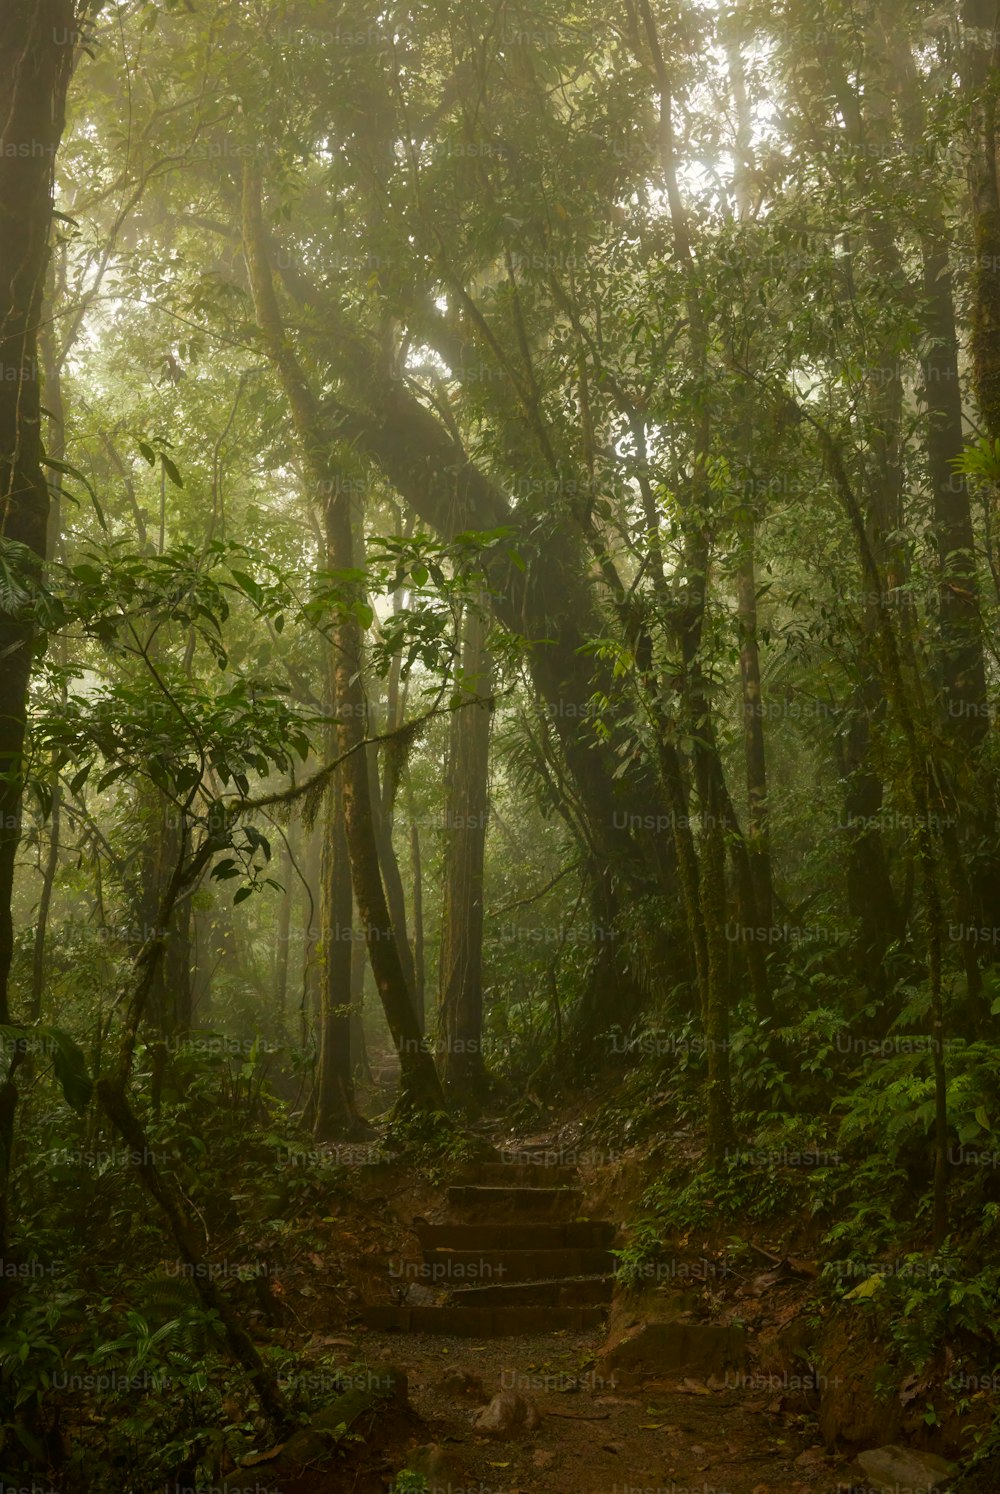 500+ Rain Forest Pictures [Stunning!]